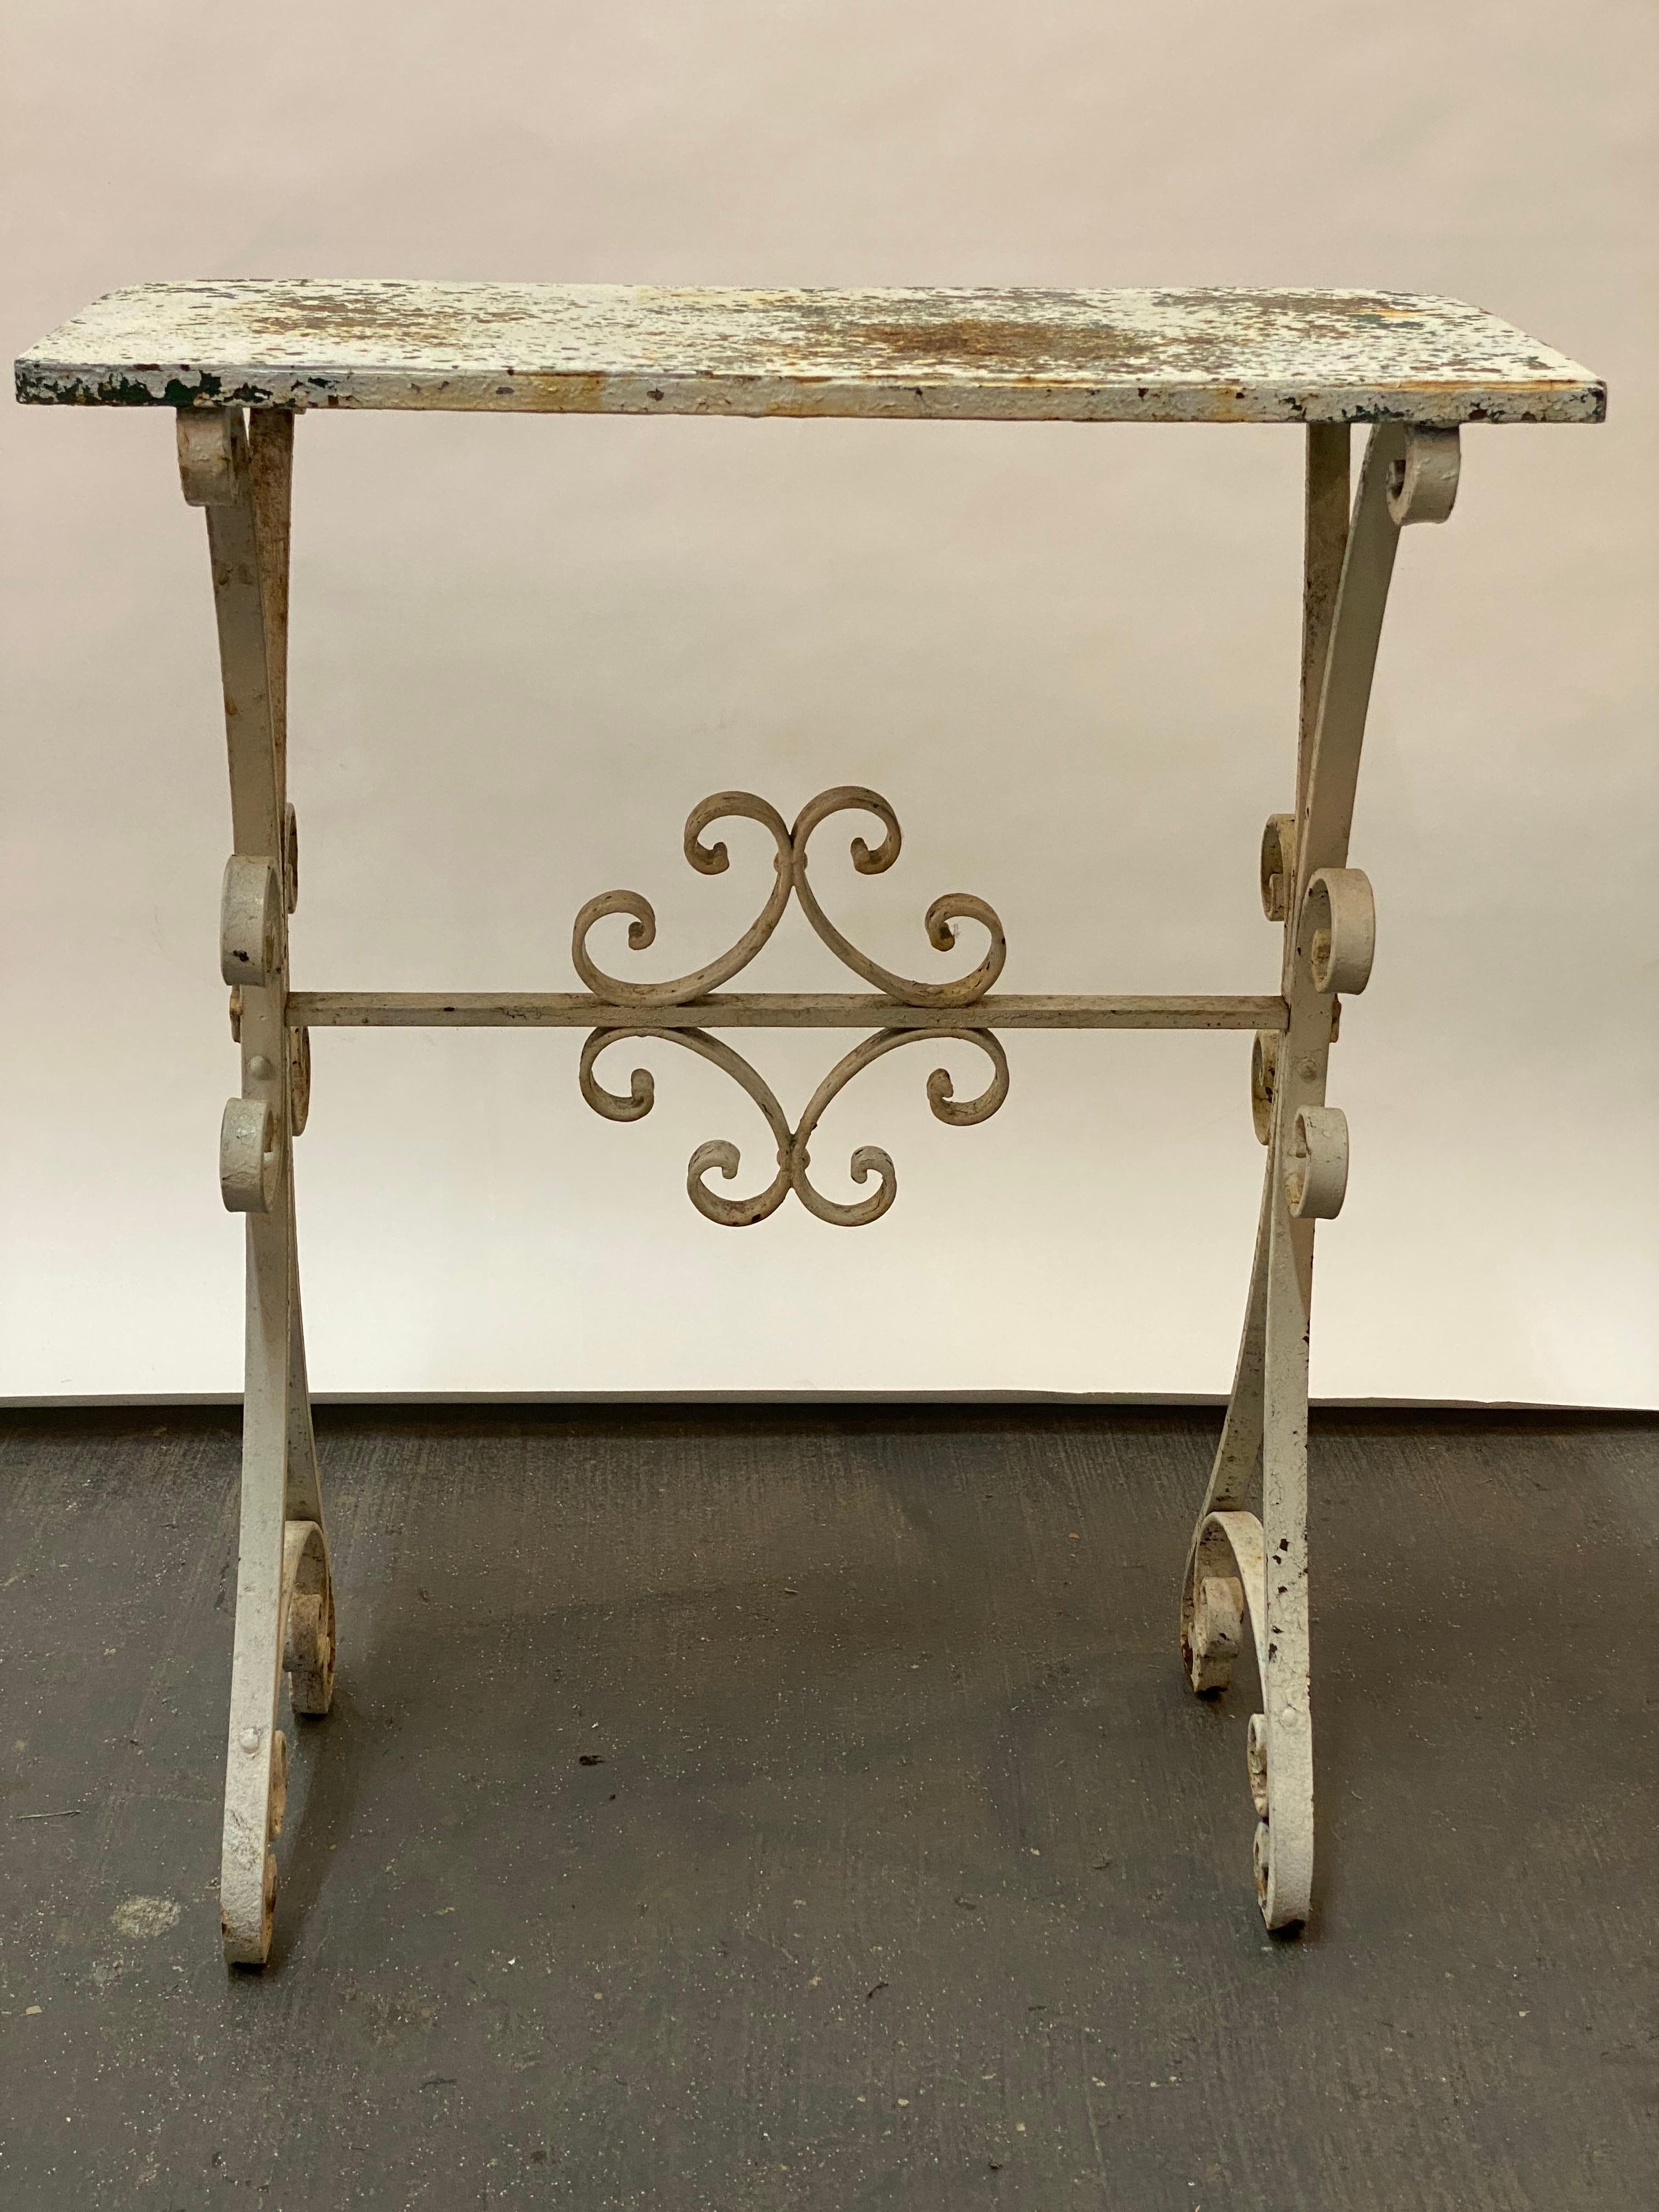 20th Century Weathered Wrought Iron Scroll and Star Motif Console Table For Sale